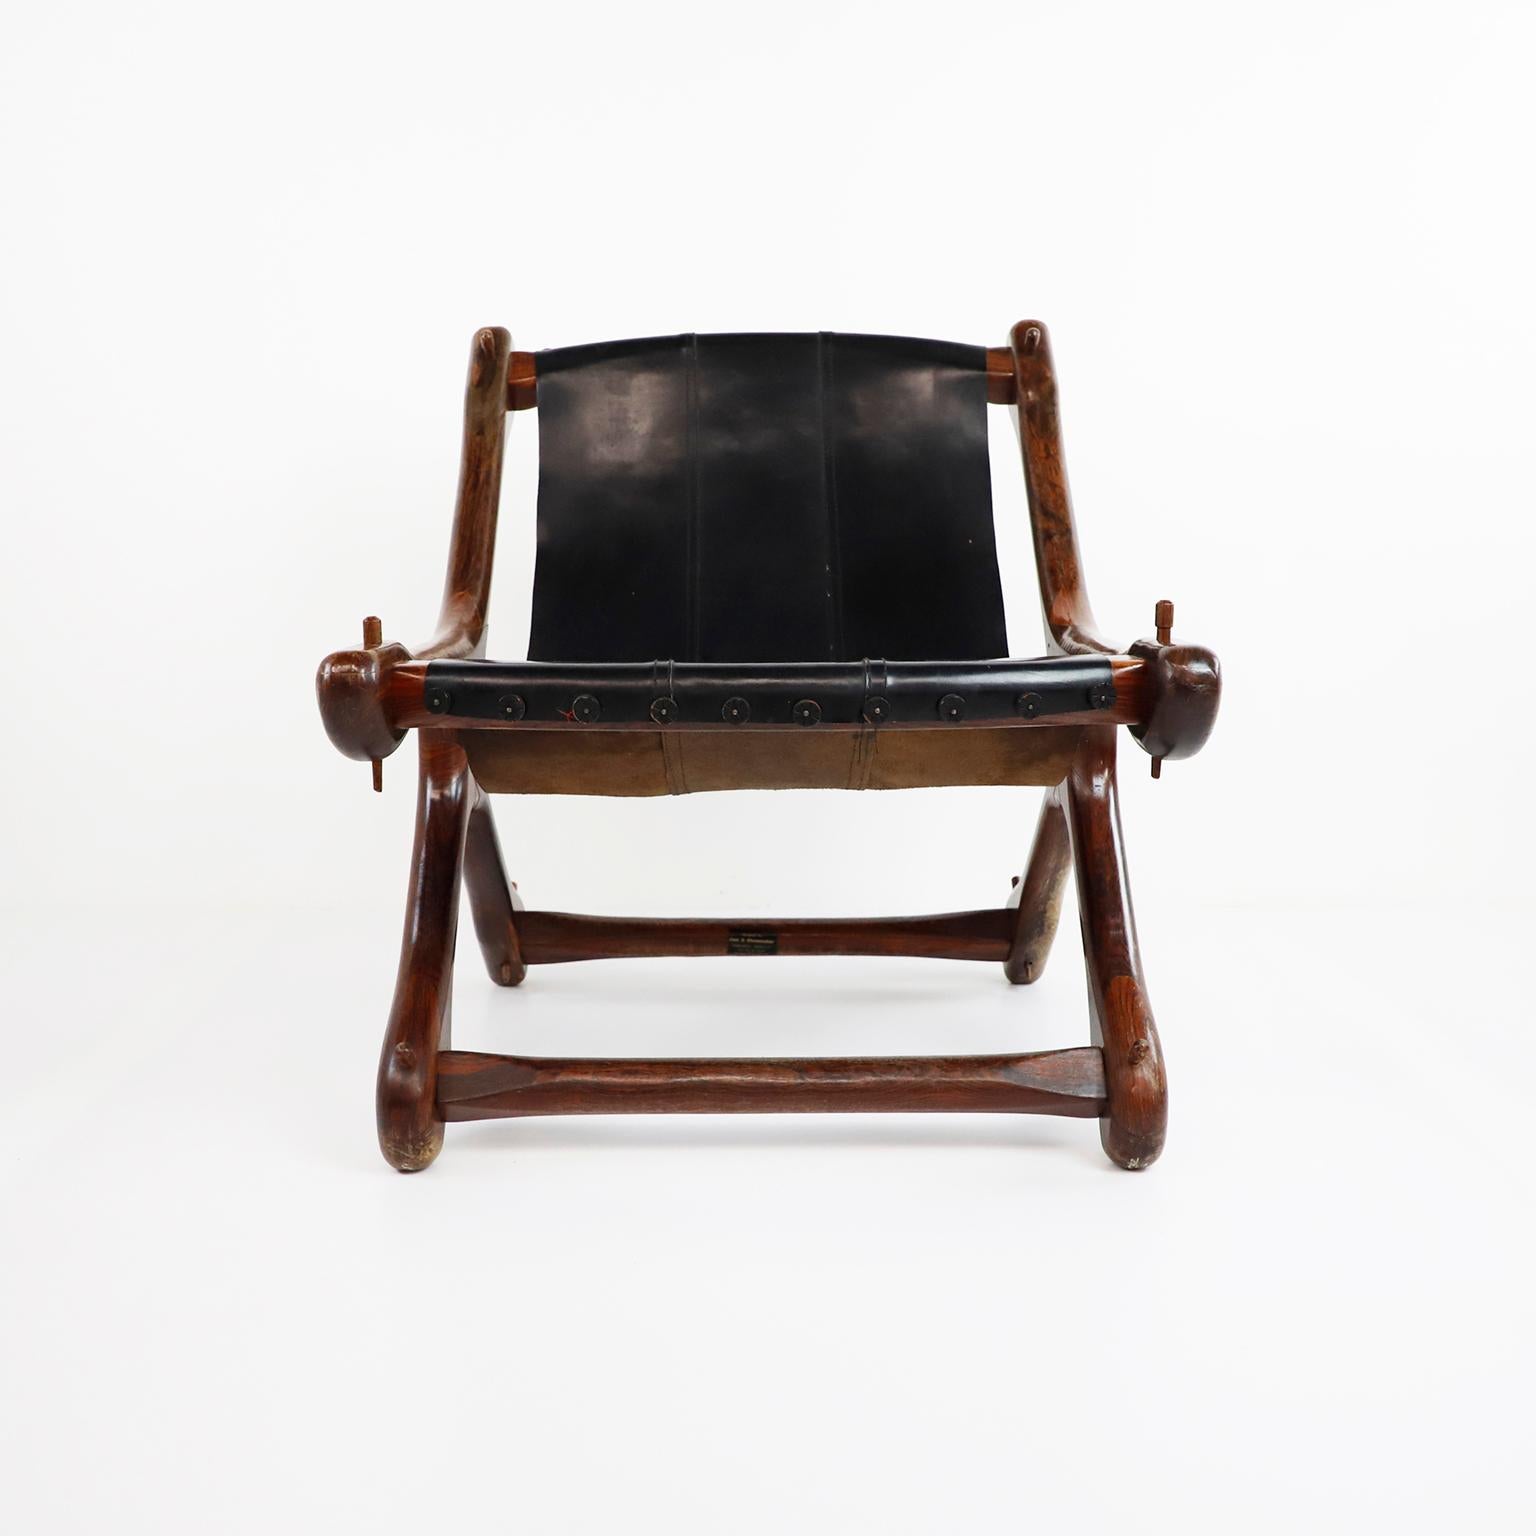 Pair of original vintage sling chairs designed and produced by Don Shoemaker for Señal S.A, solid Cocobolo with original black leather sling seat, circa 1960, includes original label, great vintage conditions.